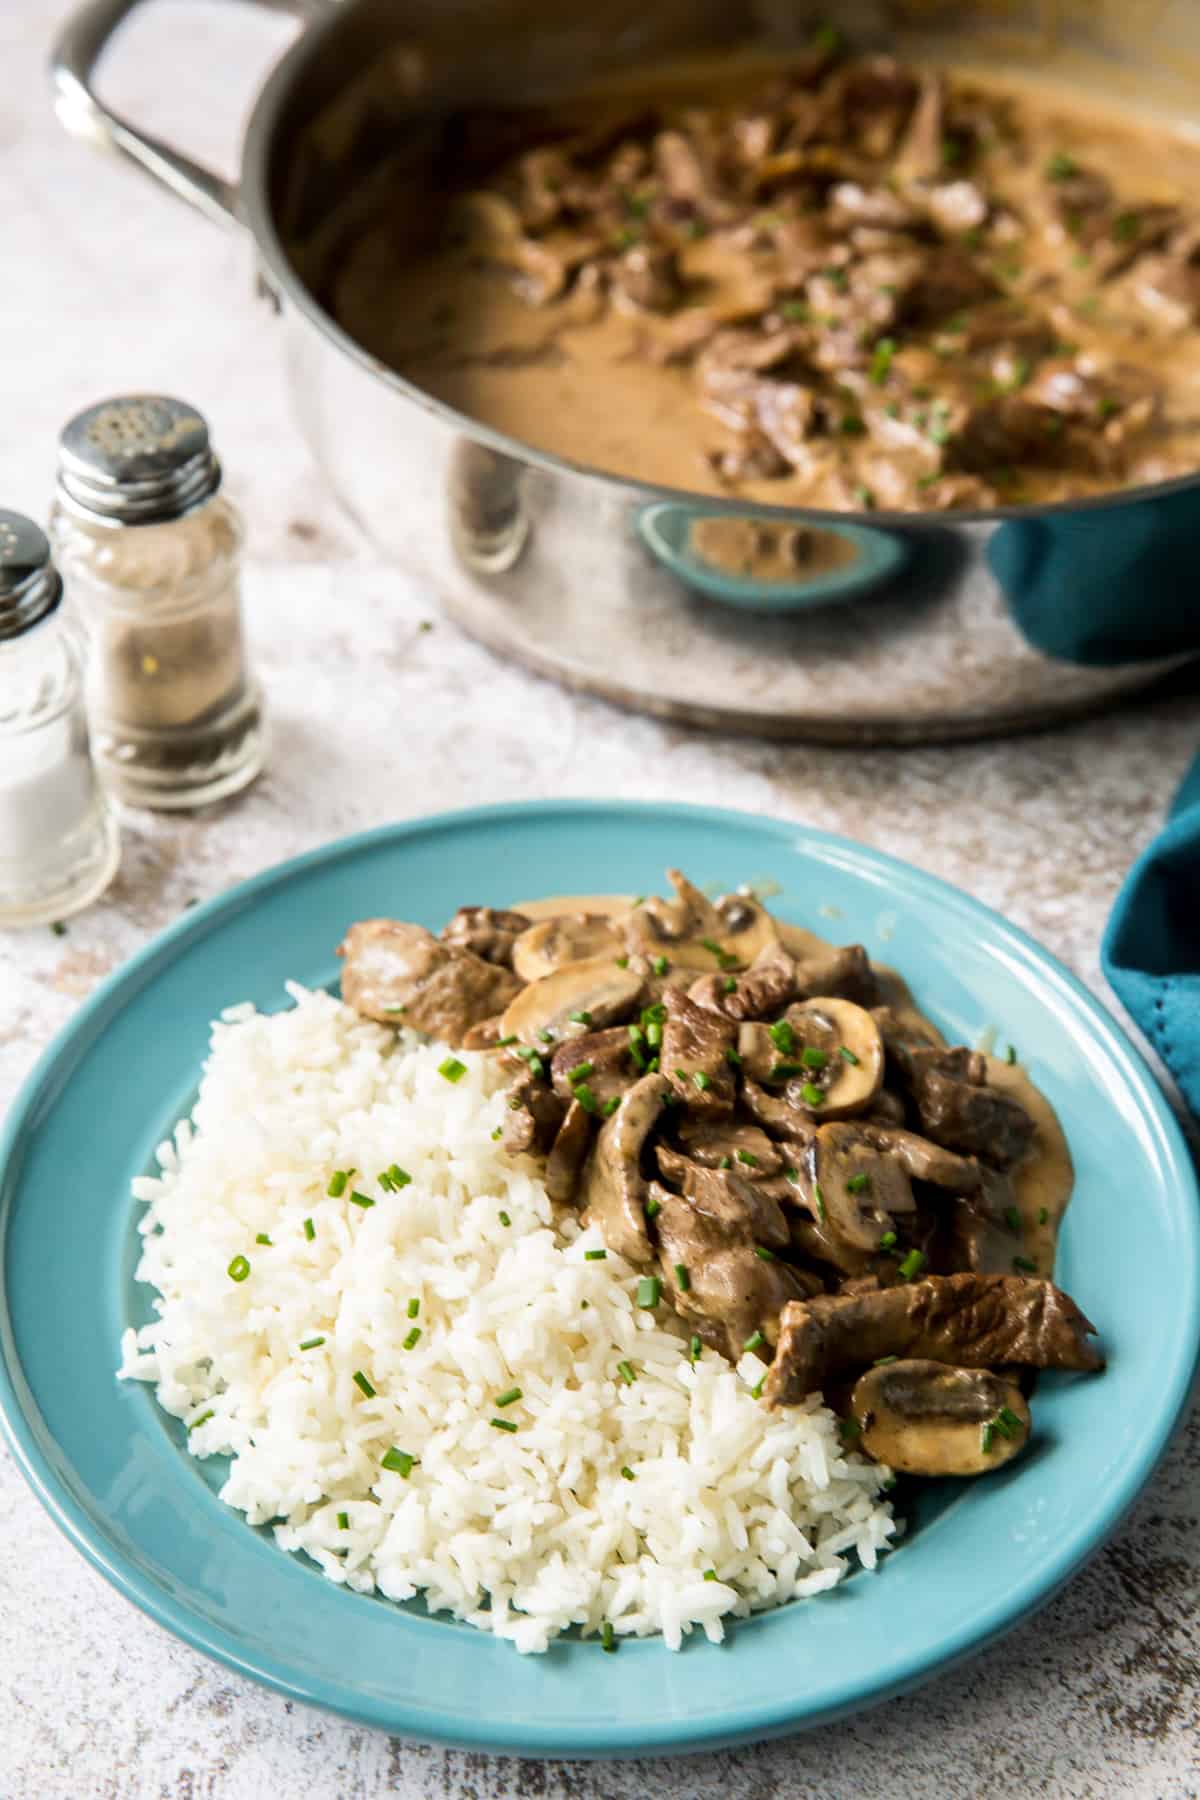 Beef stroganoff with mushrooms and wh white rice on a blue plate next to a skillet and salt and pepper shakers.